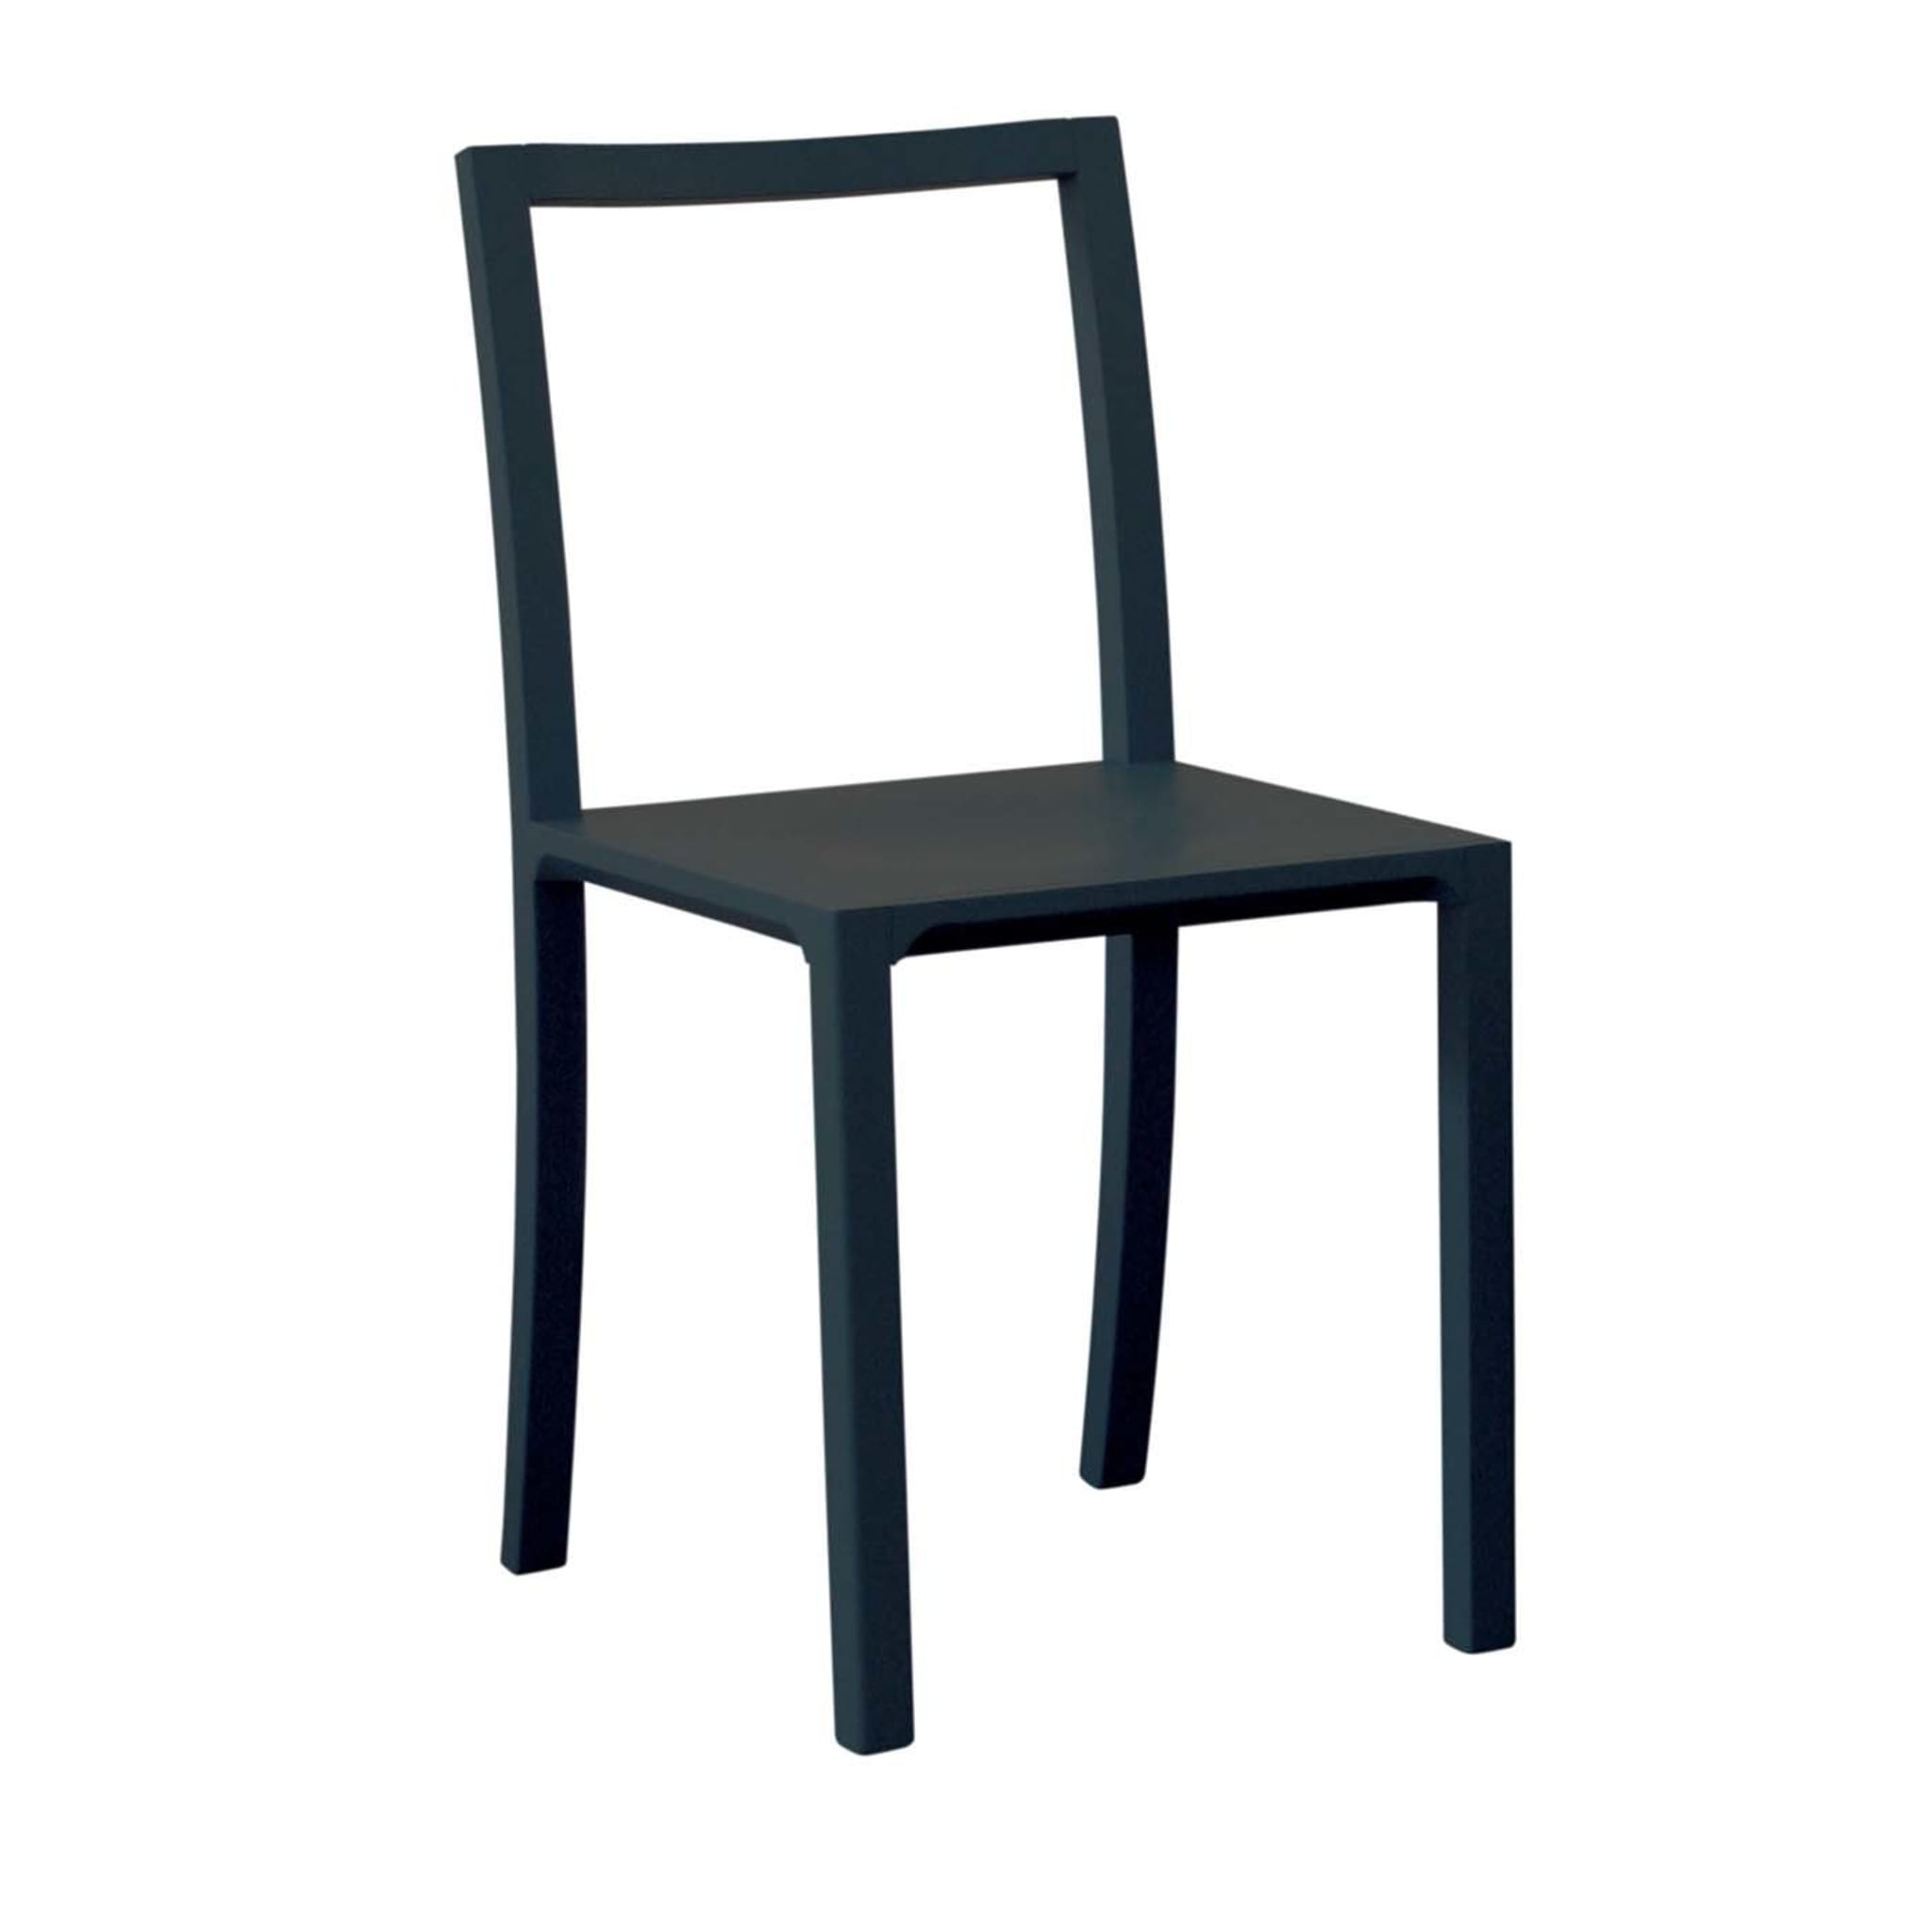 Framework Set of 2 Black Chairs by Steffen Kehrle - Main view